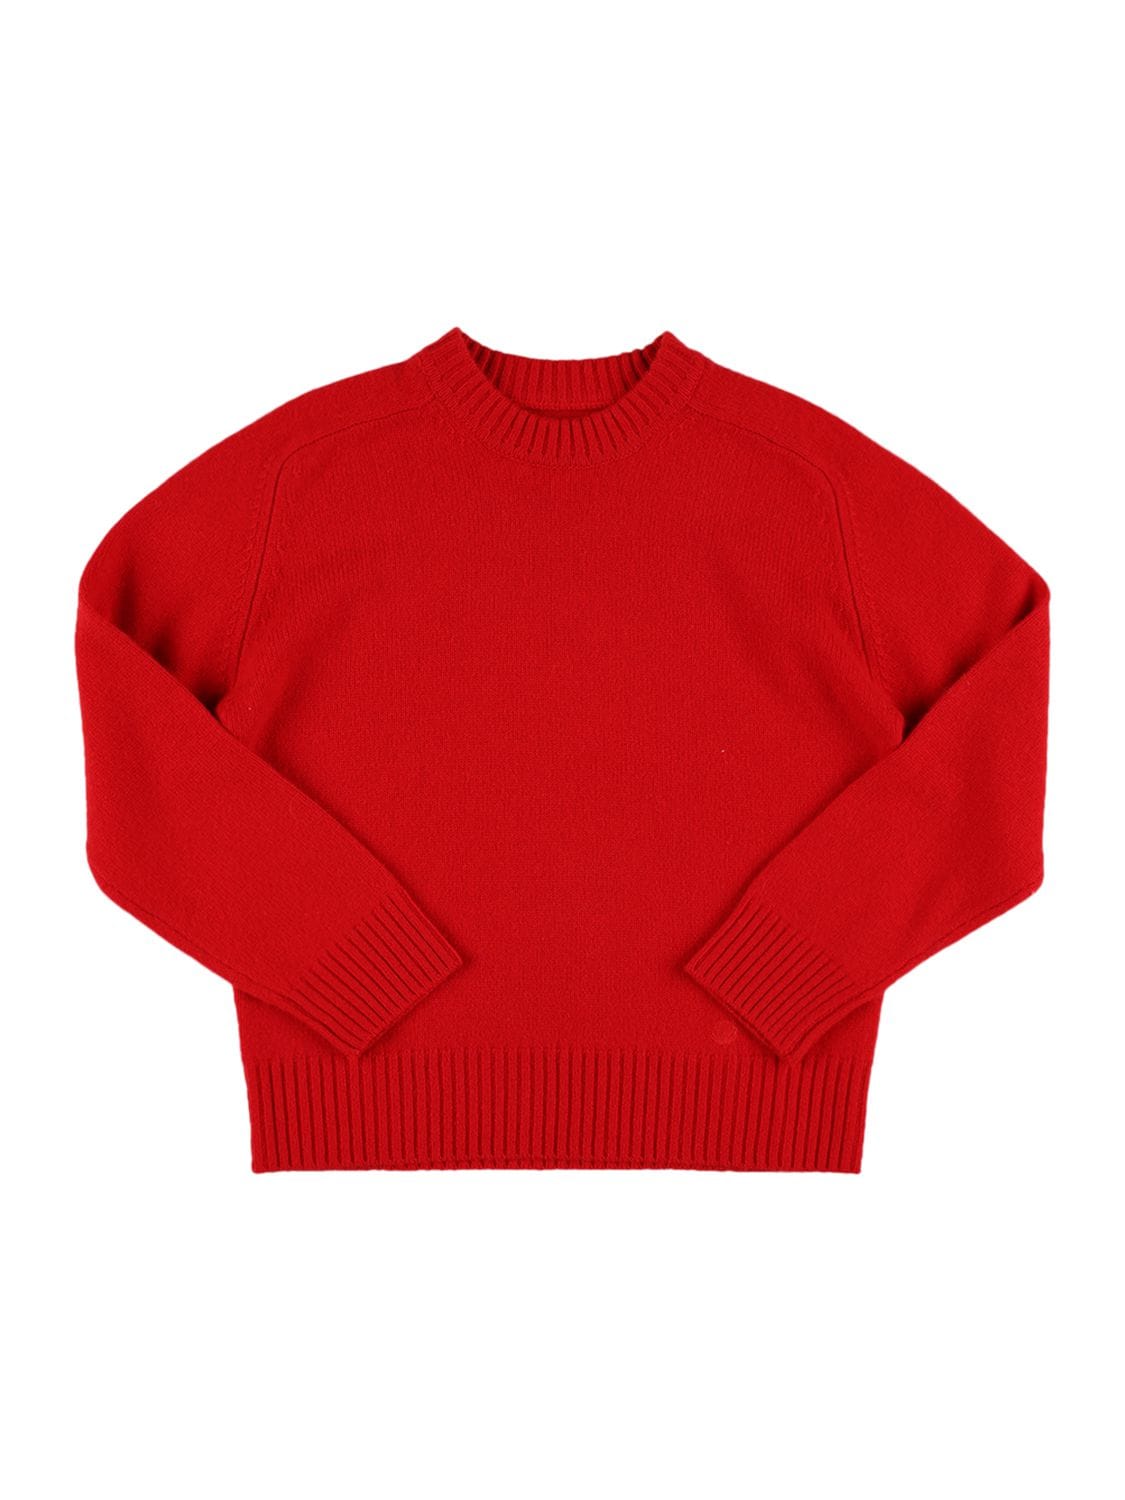 Loulou Studio Kids' Cashmere Sweater In Red